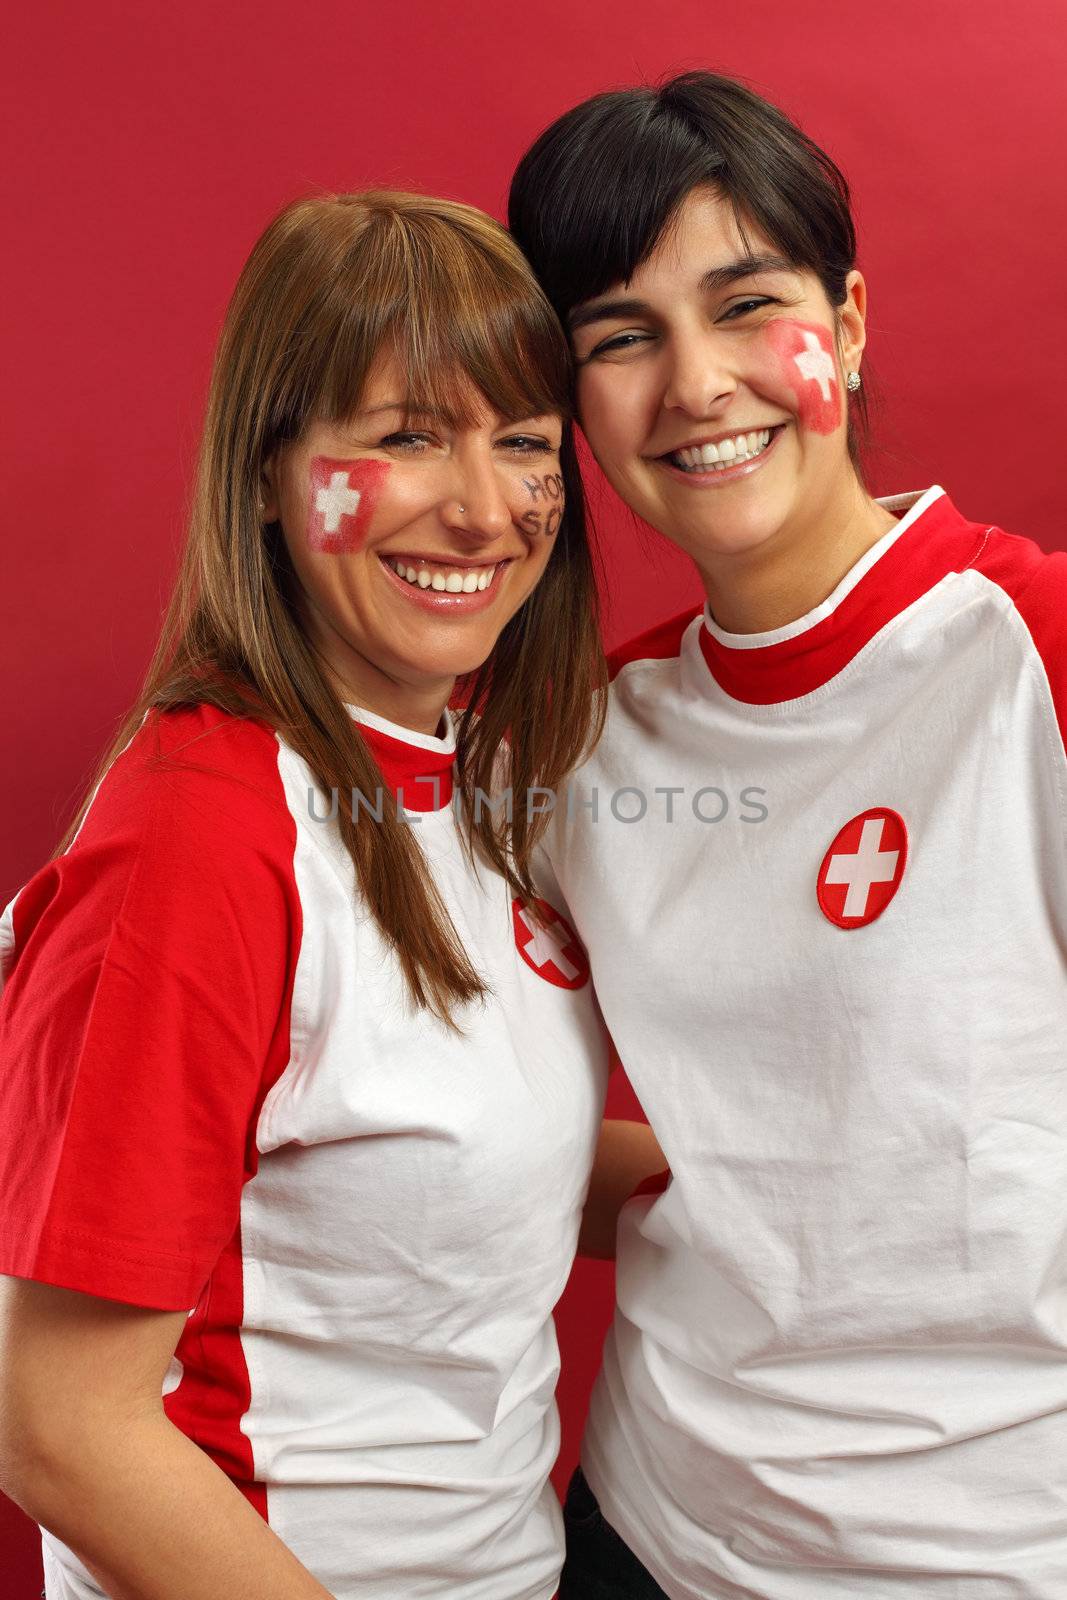 Photo of two female Swiss sports fans smiling and cheering for their team.